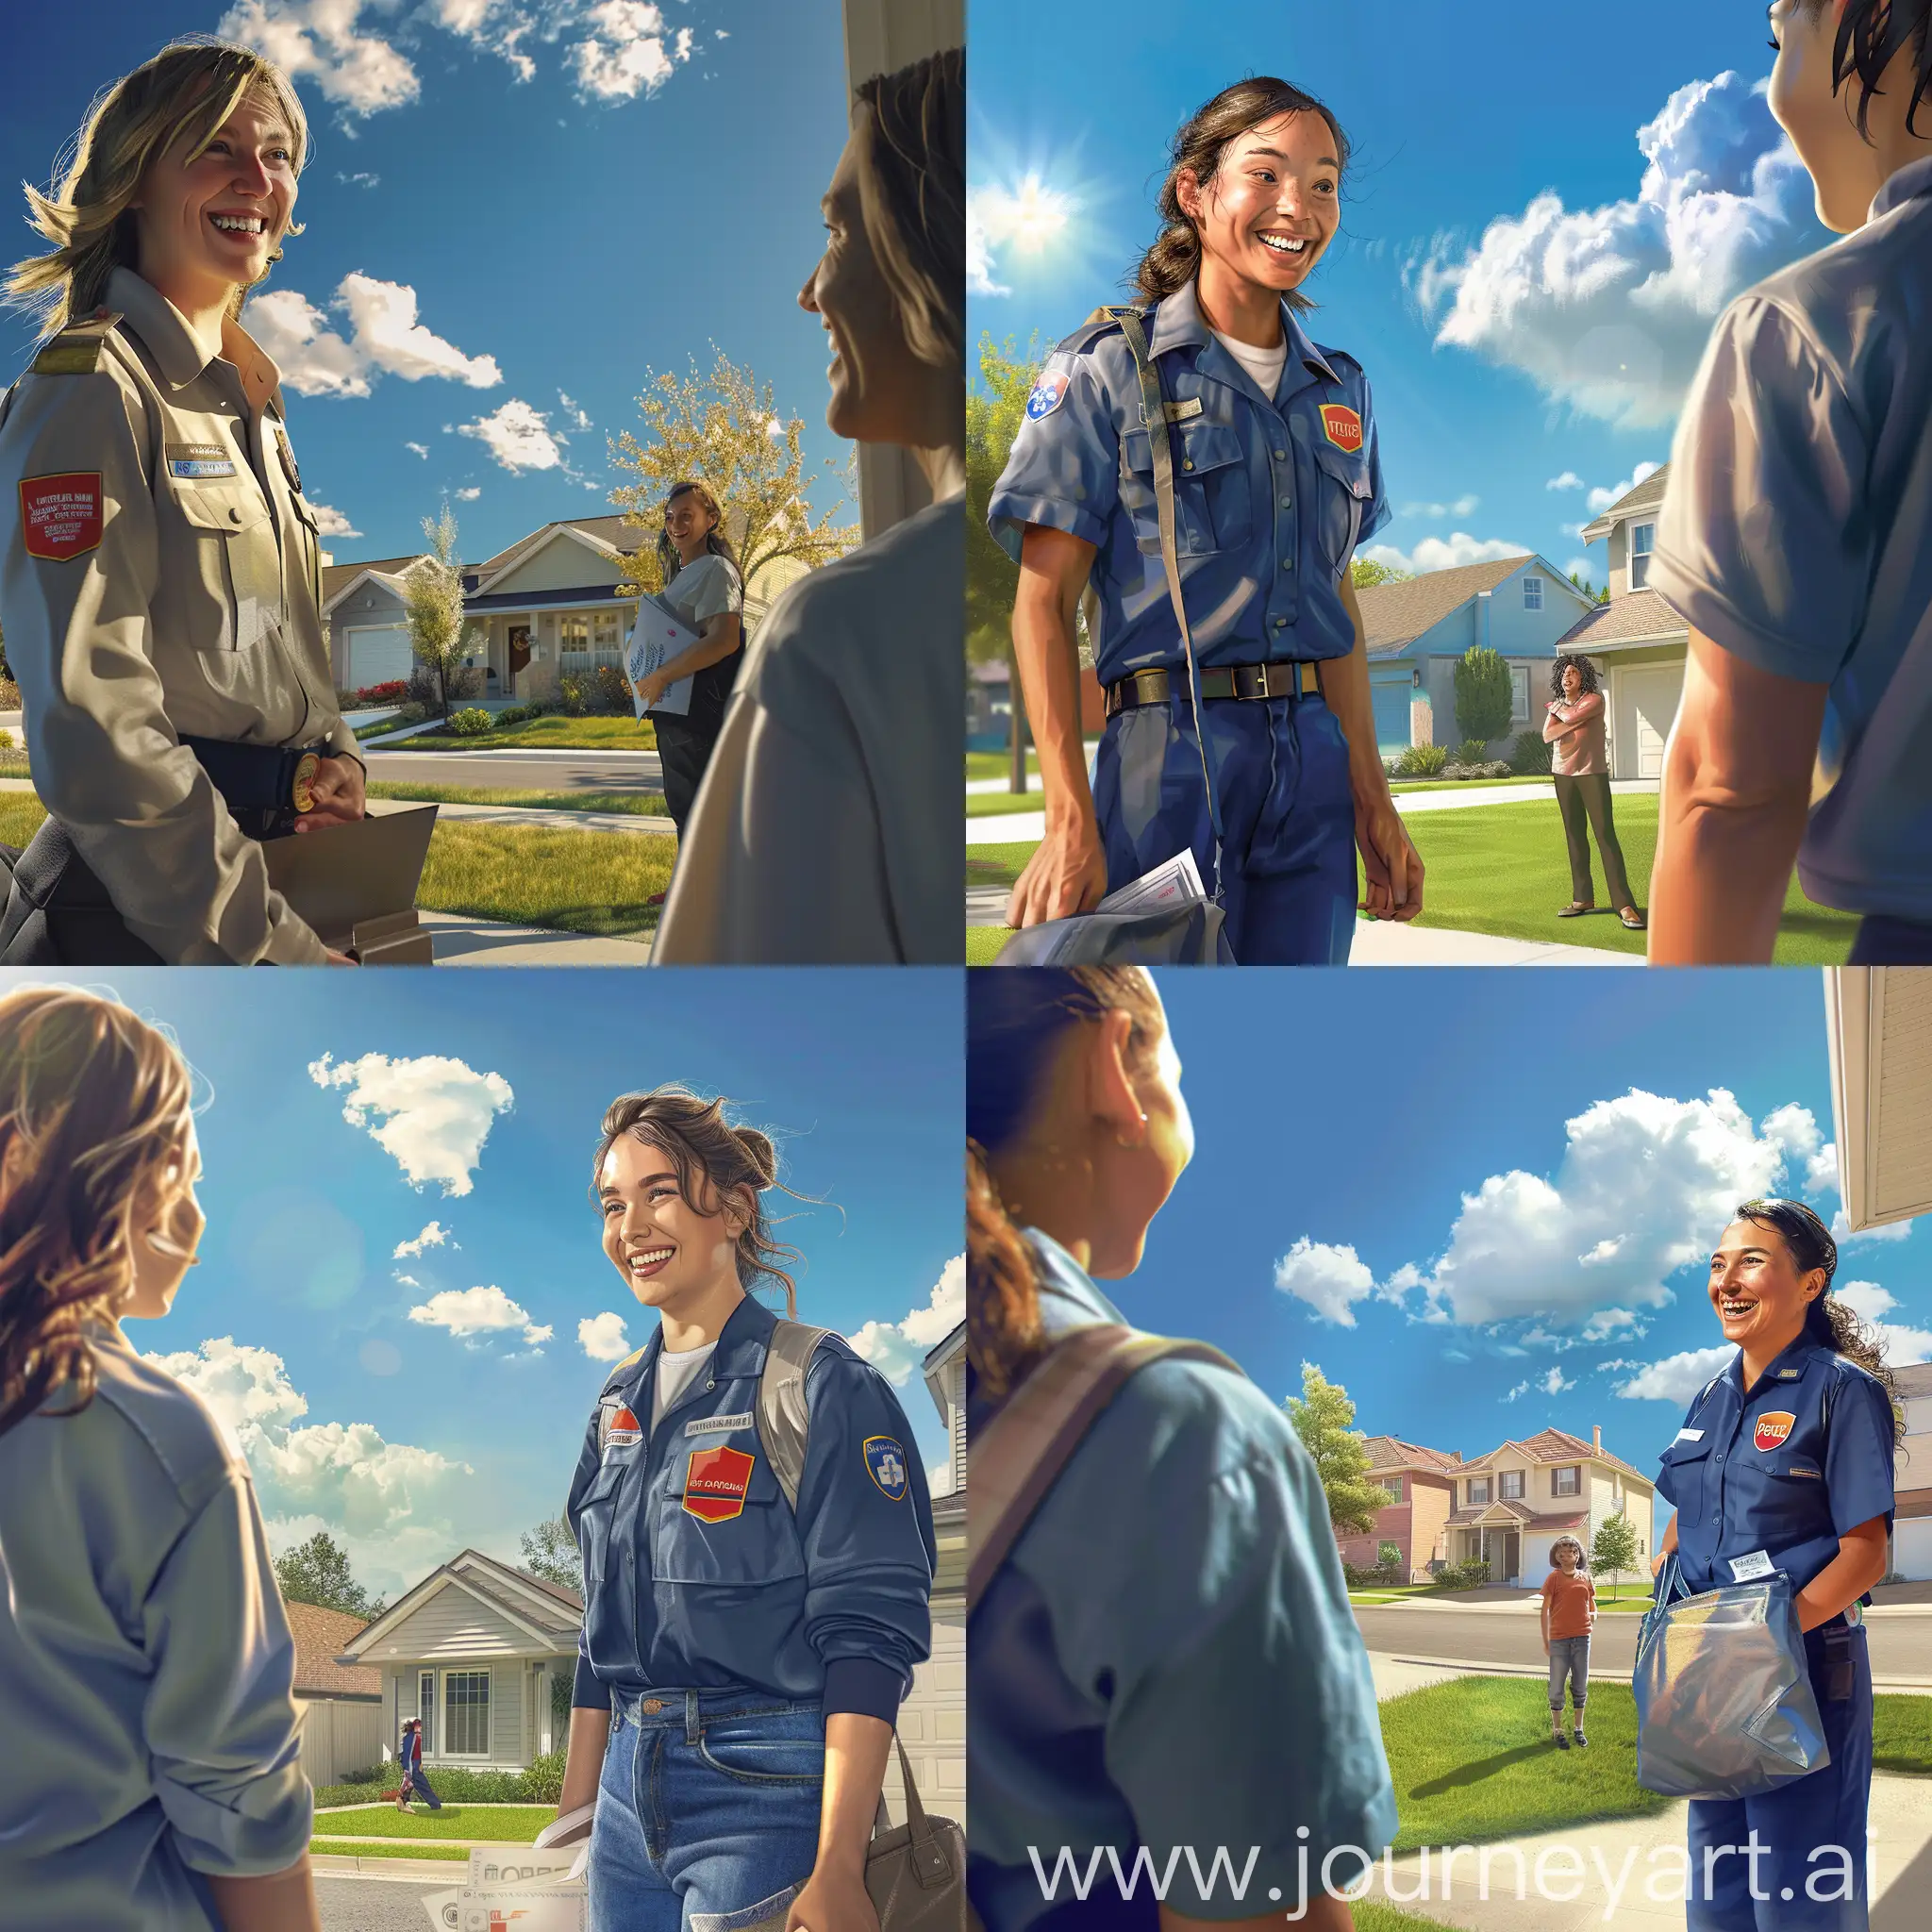 Create a photorealistic image of a real mail delivery person with a smile on her face, about to deliver mail to a person on a sunny day. The scene is bright and cheerful. The mail carrier is wearing a postal uniform and carrying a mailbag. The background includes a clear blue sky with a few fluffy clouds and a residential area featuring houses with green lawns. The recipient is standing at their doorstep, looking happy to receive the mail. The image should look as if it was taken with a real photo camera, capturing the warmth and friendliness of the moment.